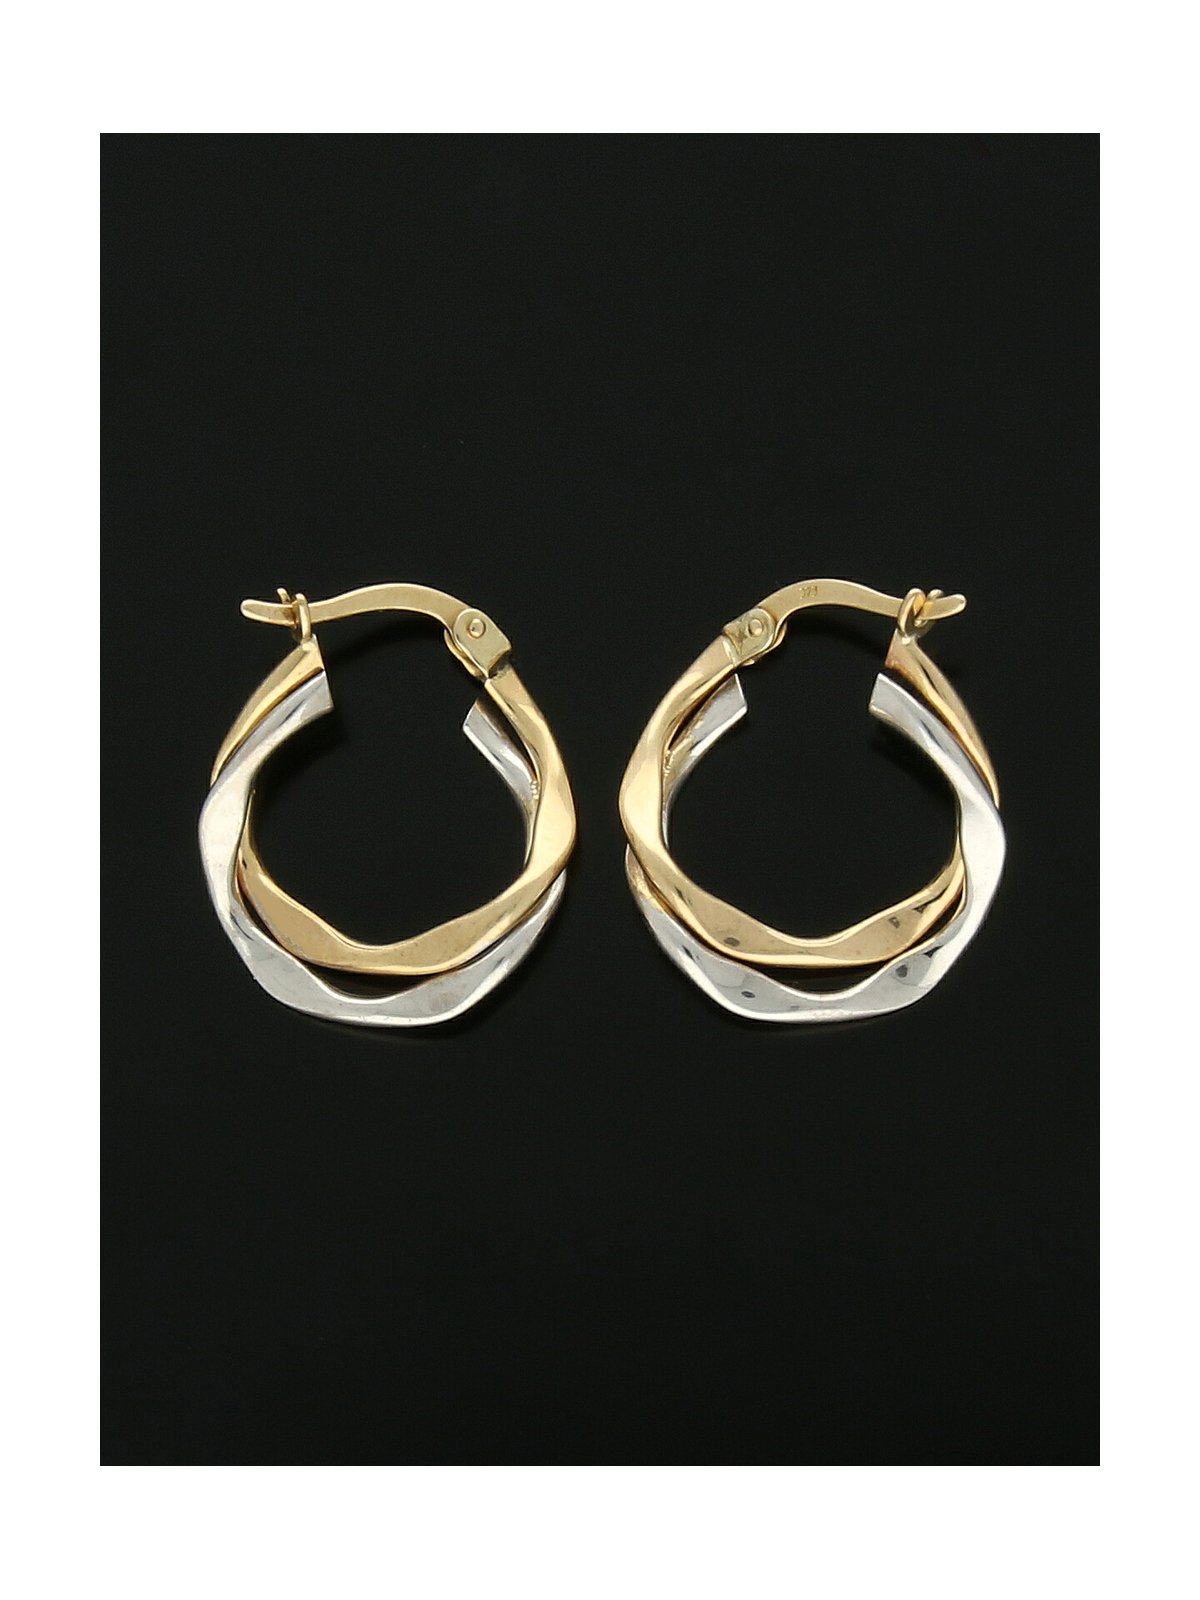 Hammered Wavy Hoop Earrings 18mm in 9ct Yellow & White Gold